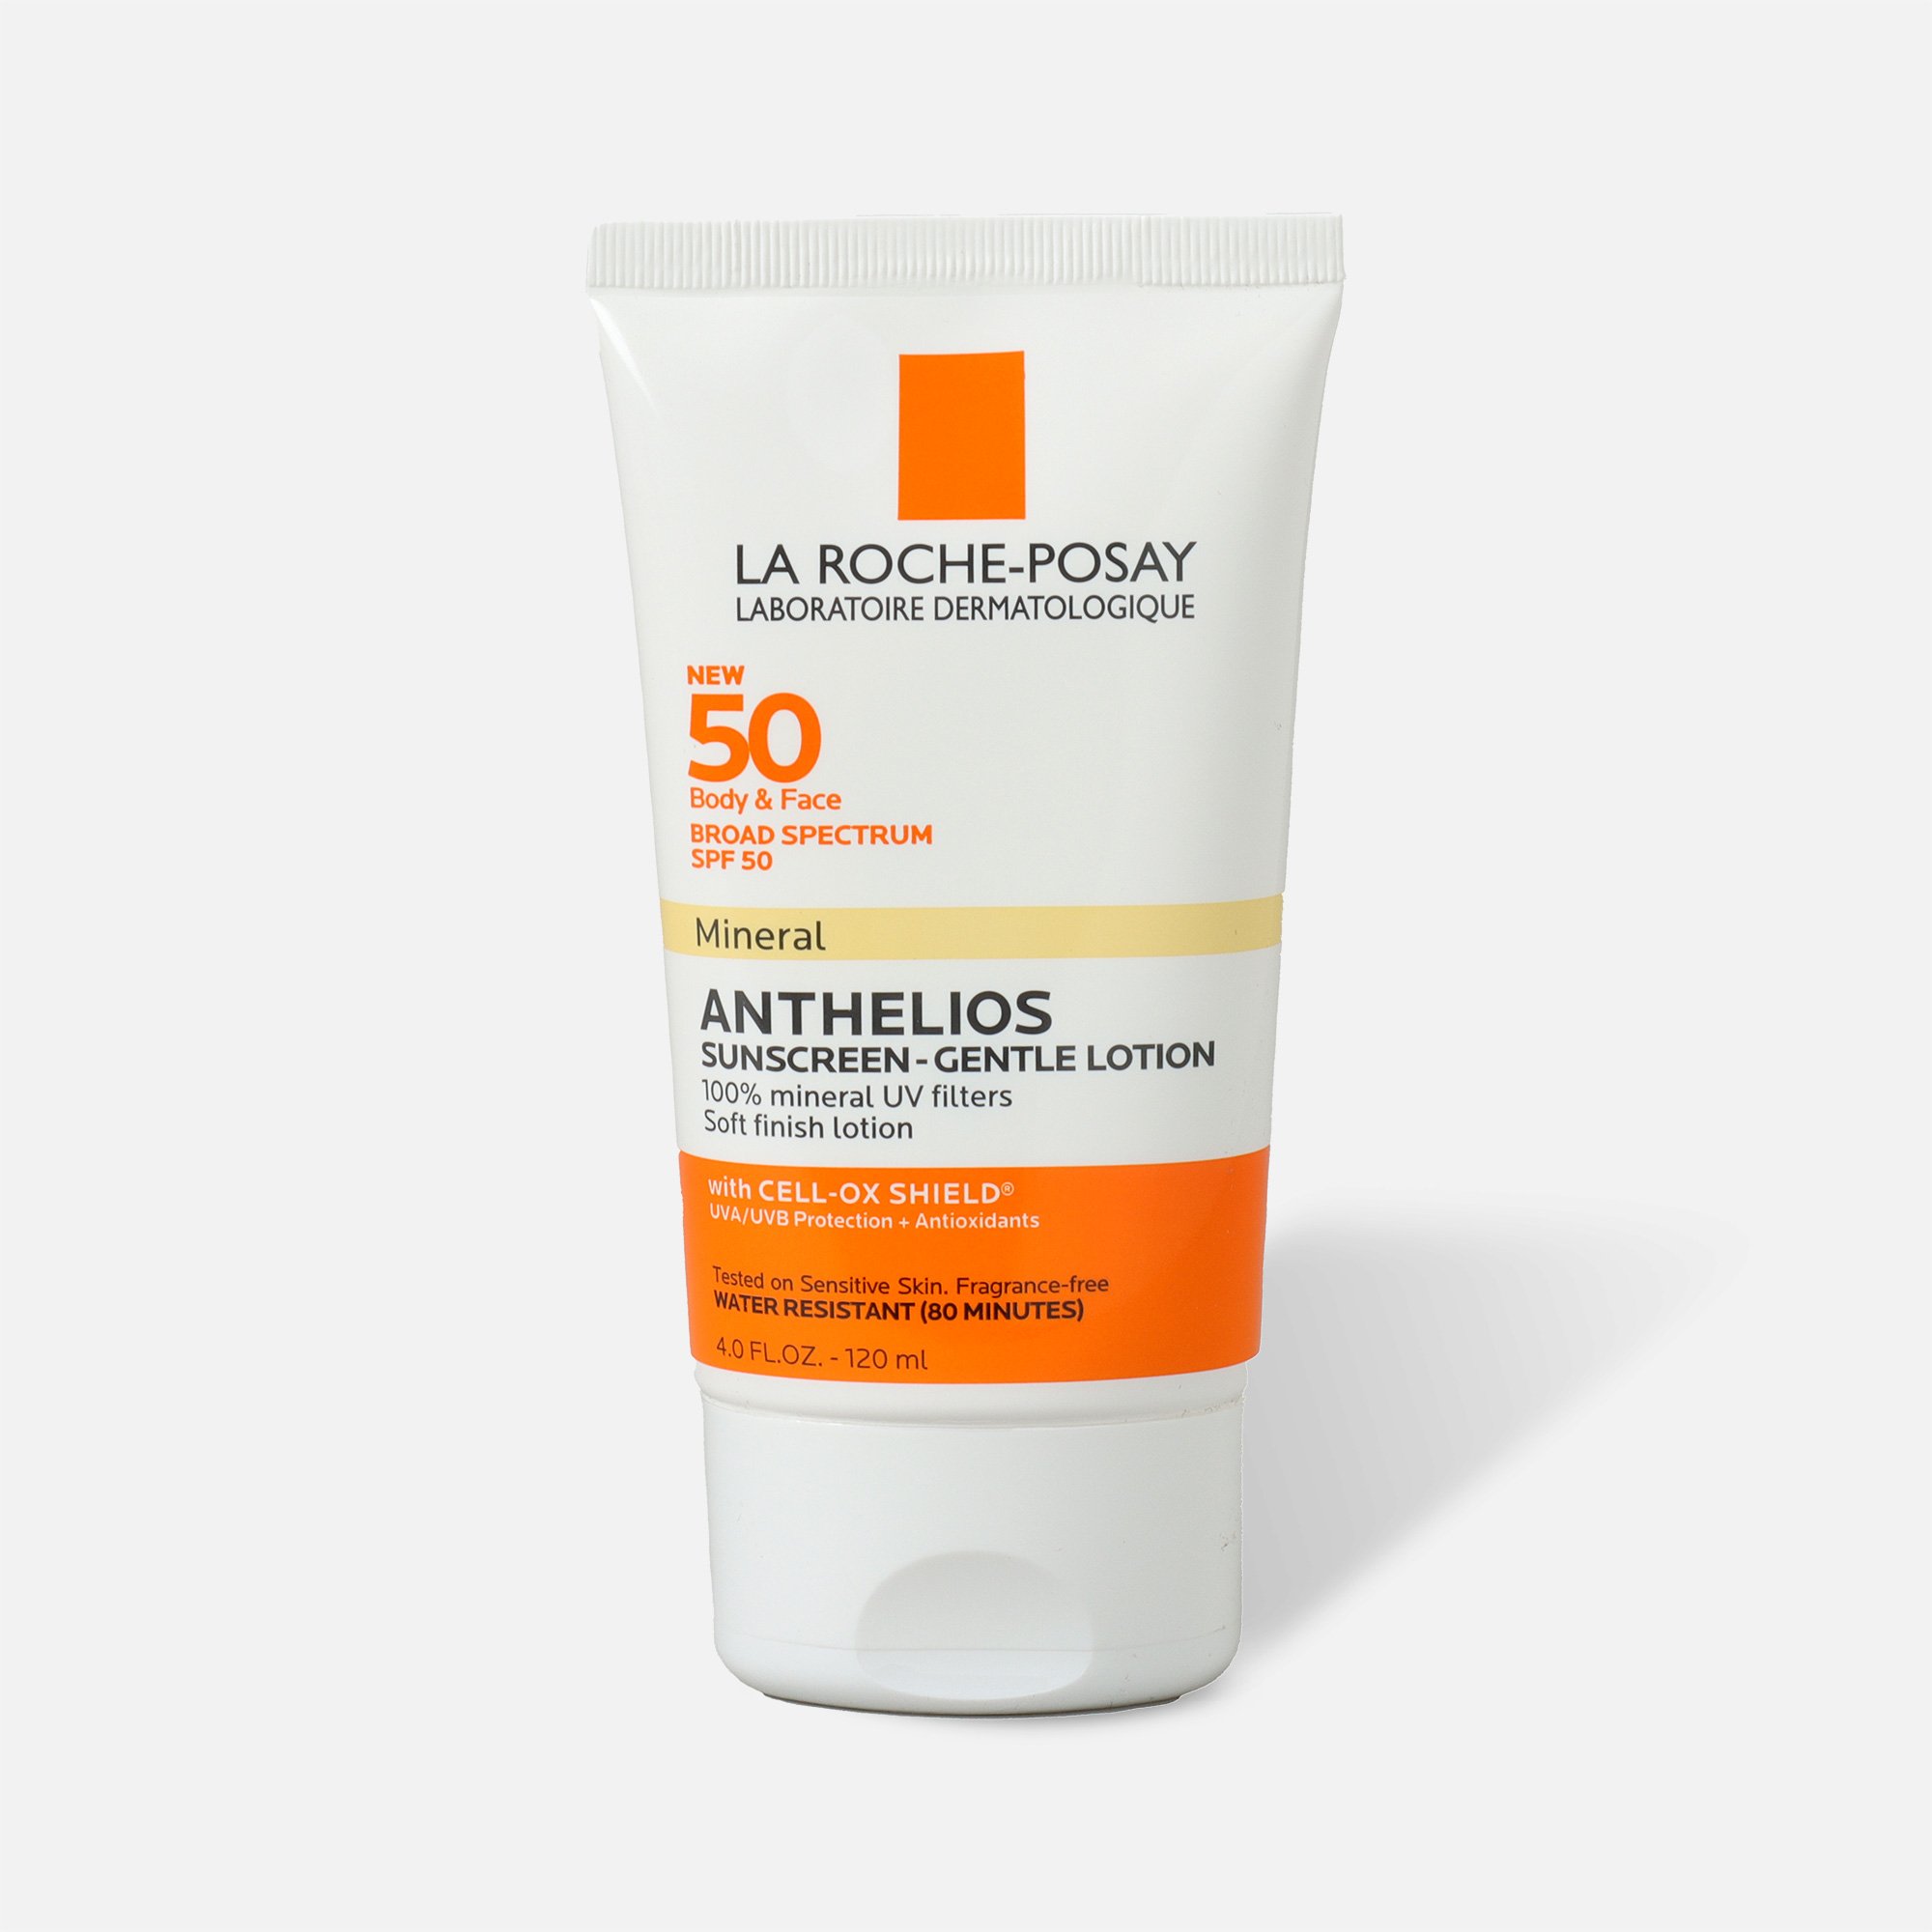 La Roche-Posay Anthelios Gentle Lotion Mineral Sunscreen, SPF 50